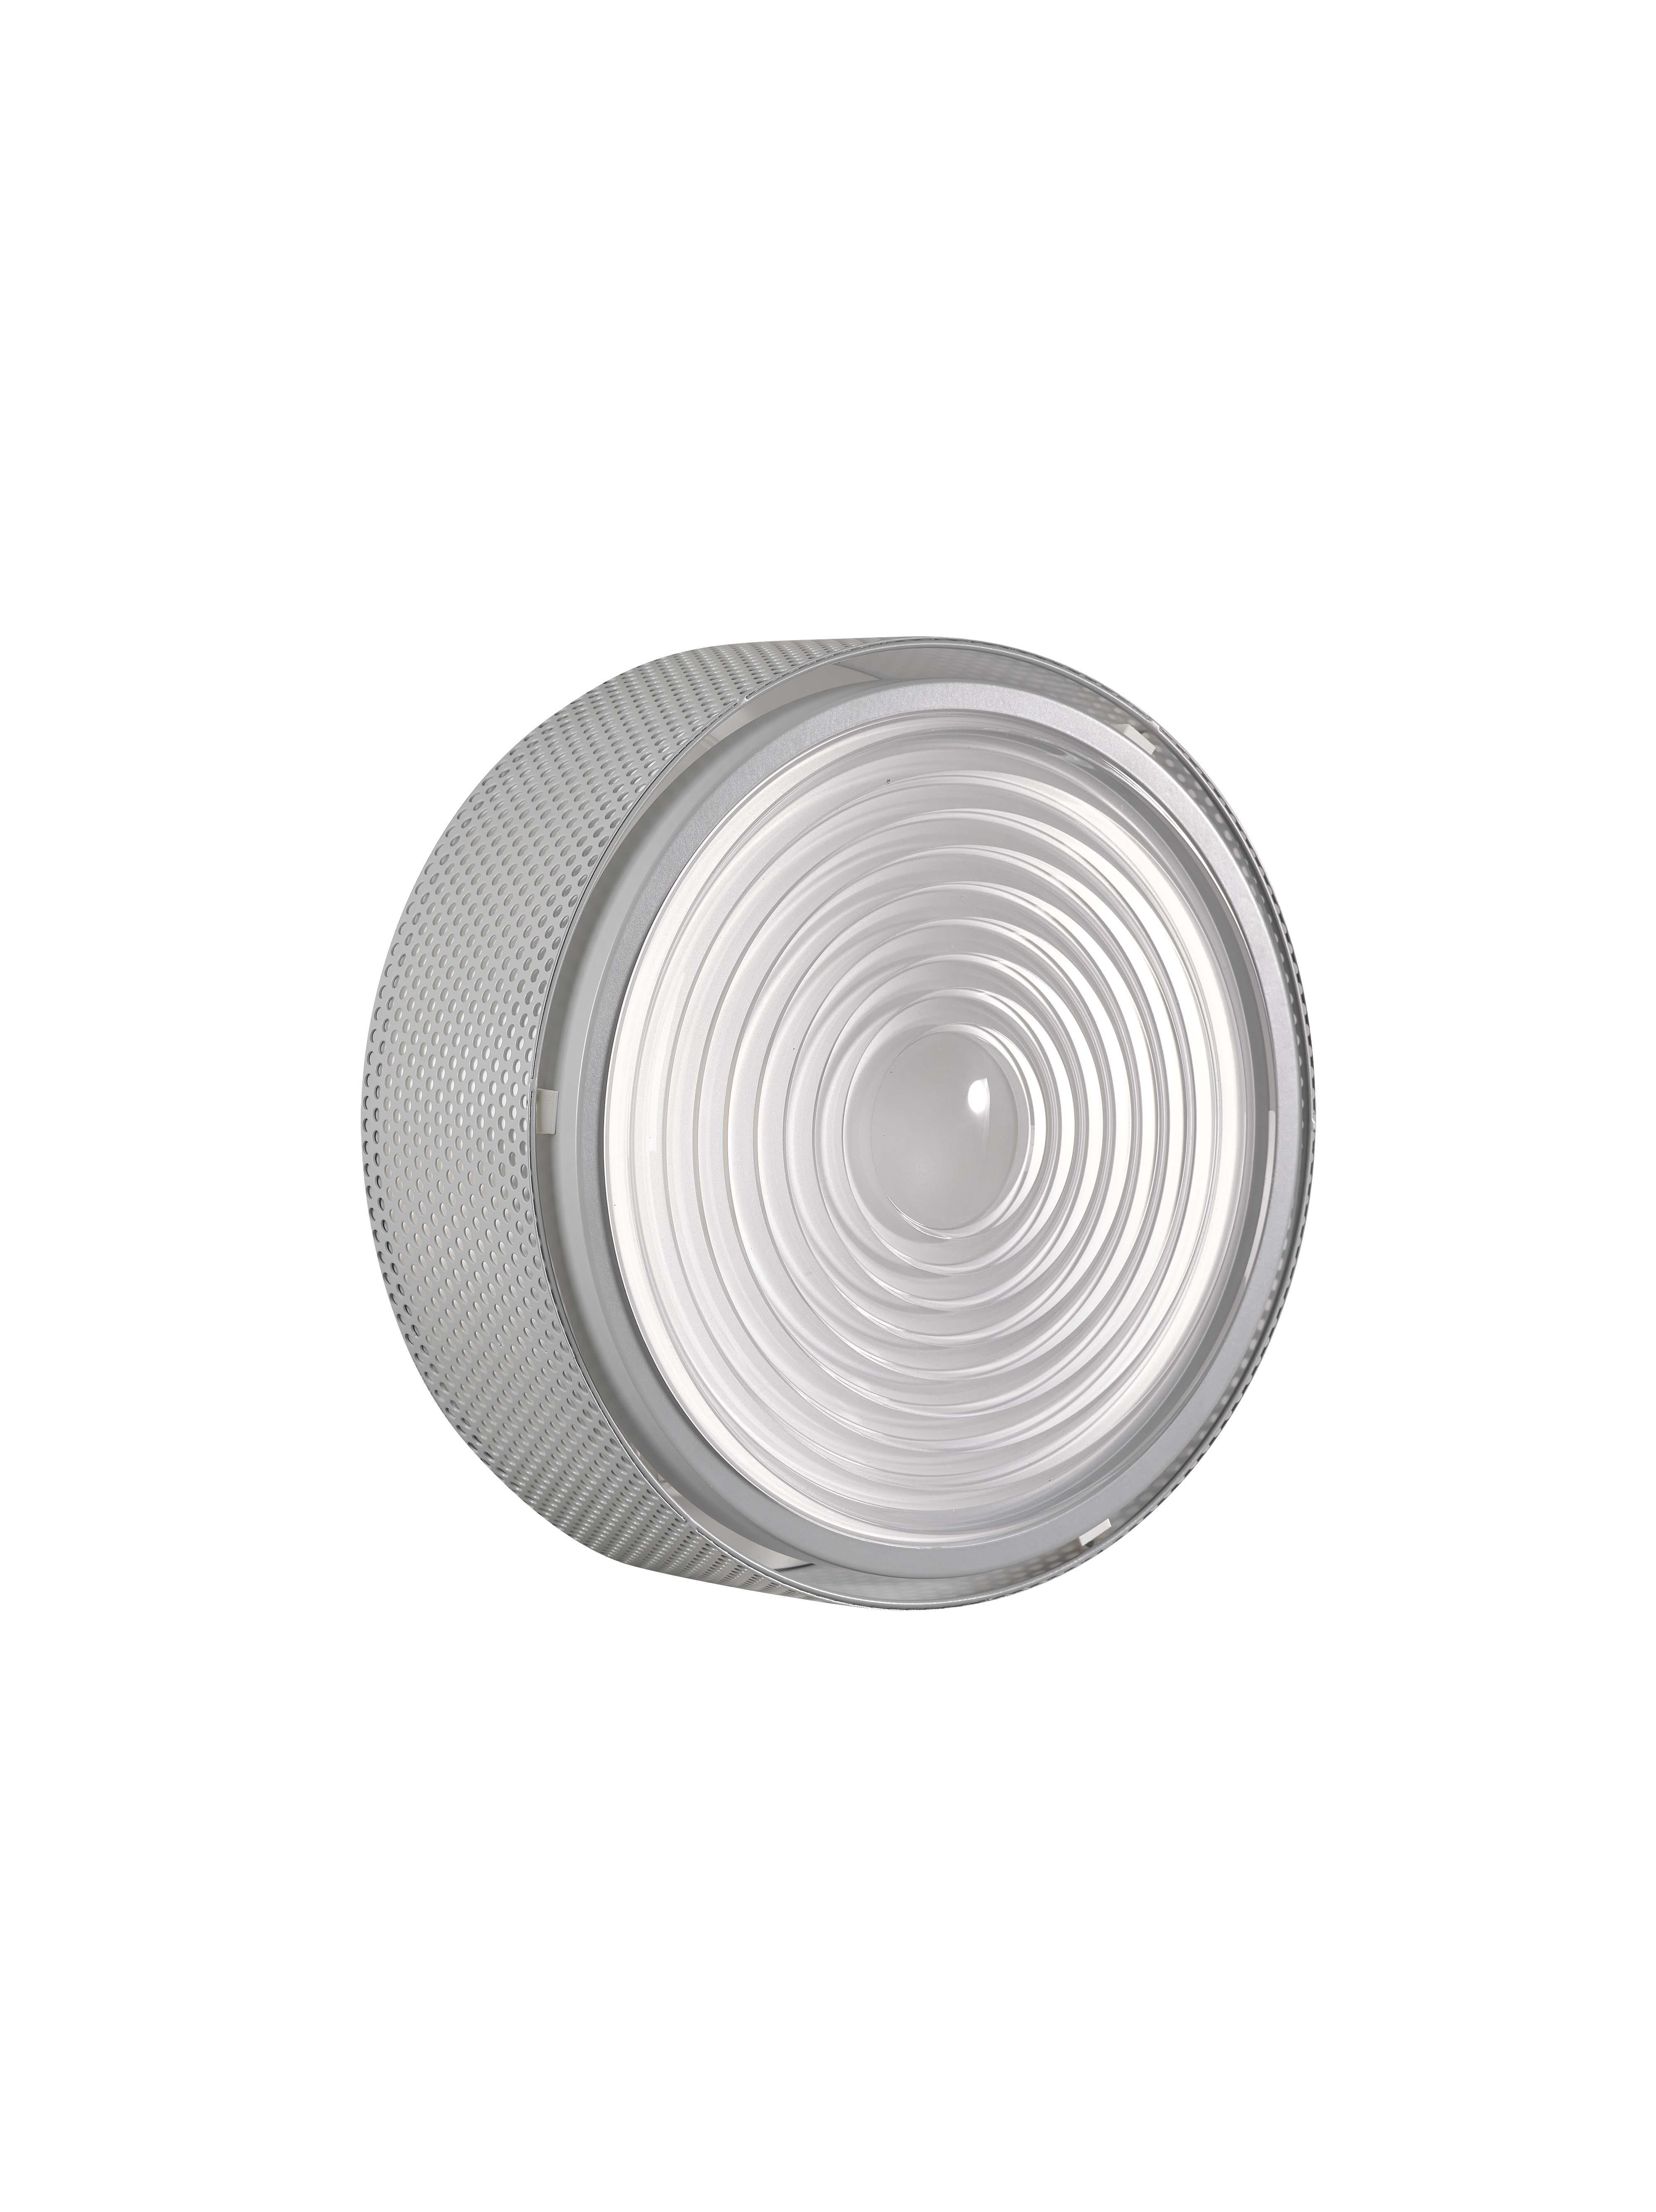 Large Pierre Guariche 'G13' Wall or Ceiling Light for Sammode Studio in Gray For Sale 1